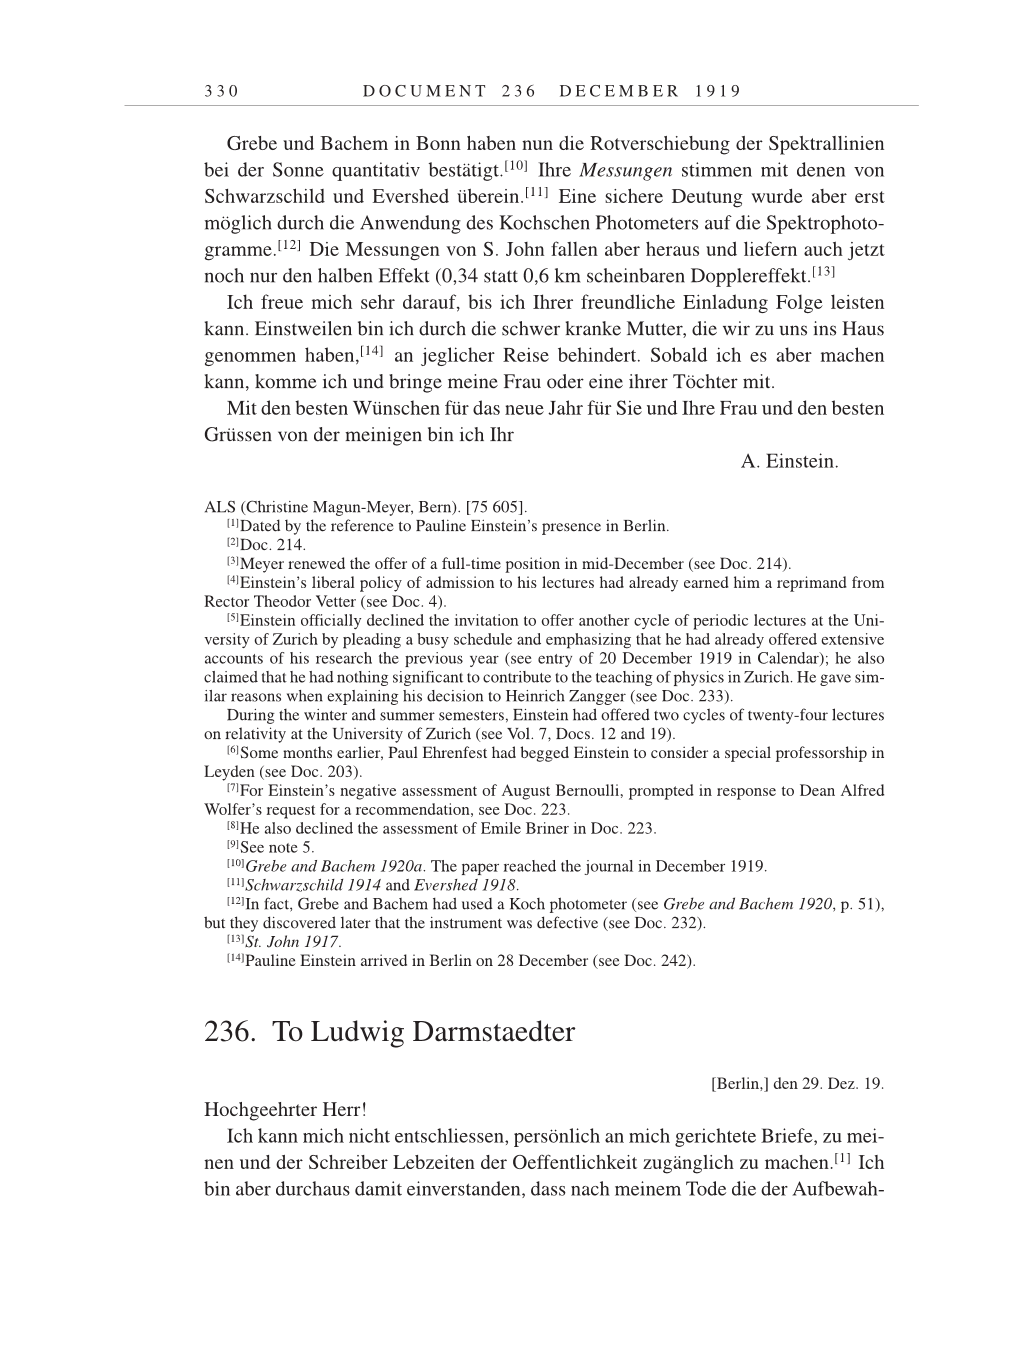 Volume 9: The Berlin Years: Correspondence January 1919-April 1920 page 330